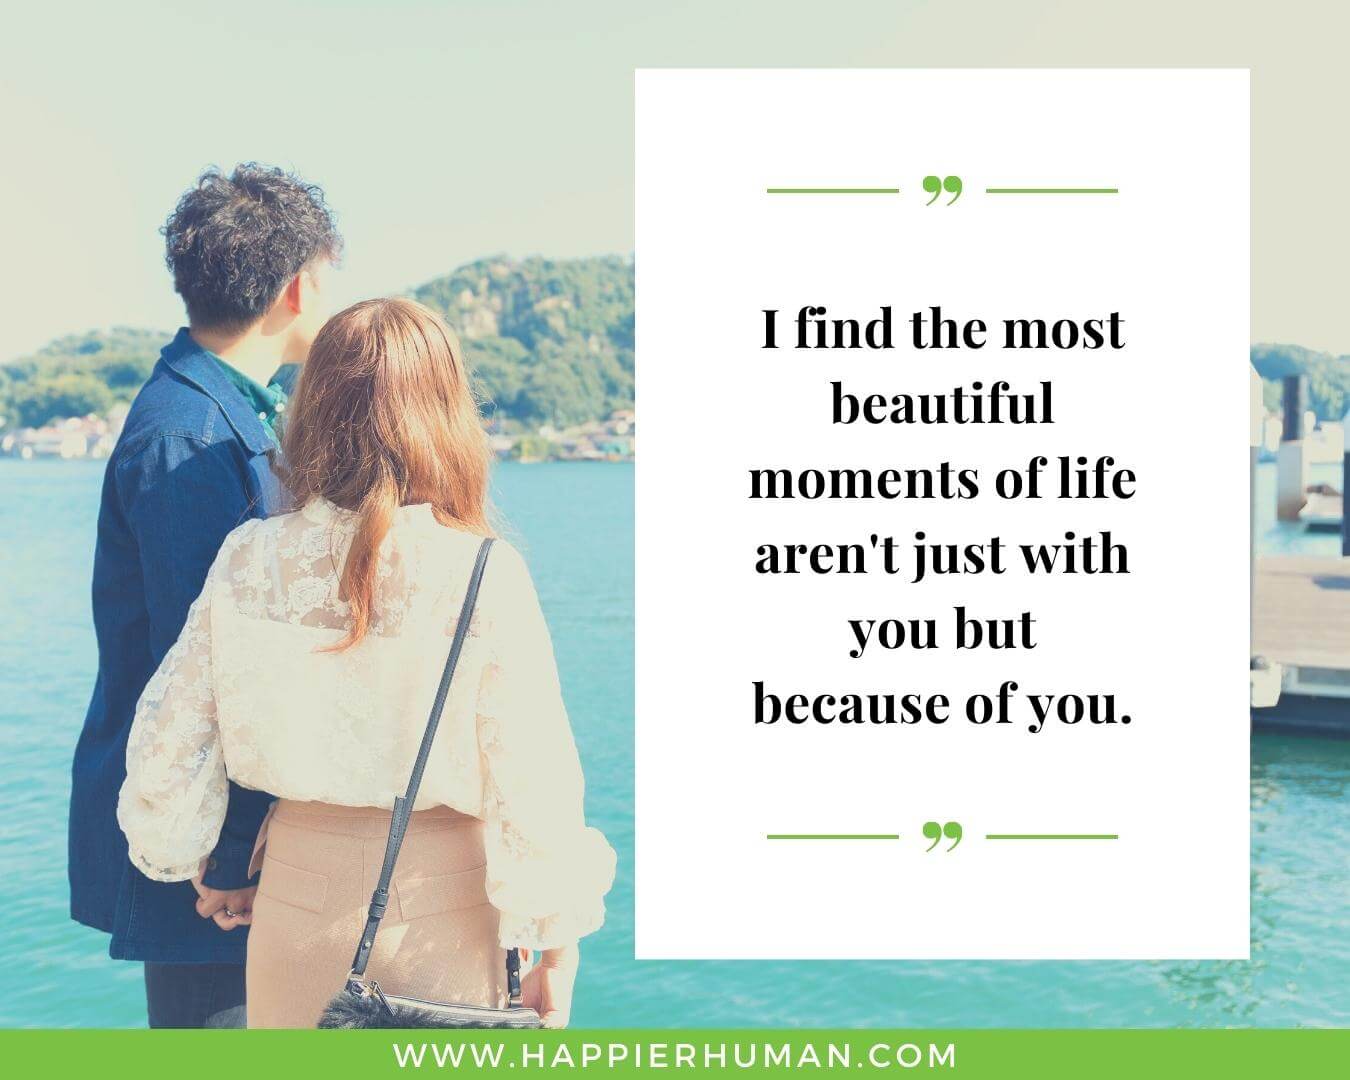 Unconditional Love Quotes for Her - “I find the most beautiful moments of life aren't just with you but because of you.”